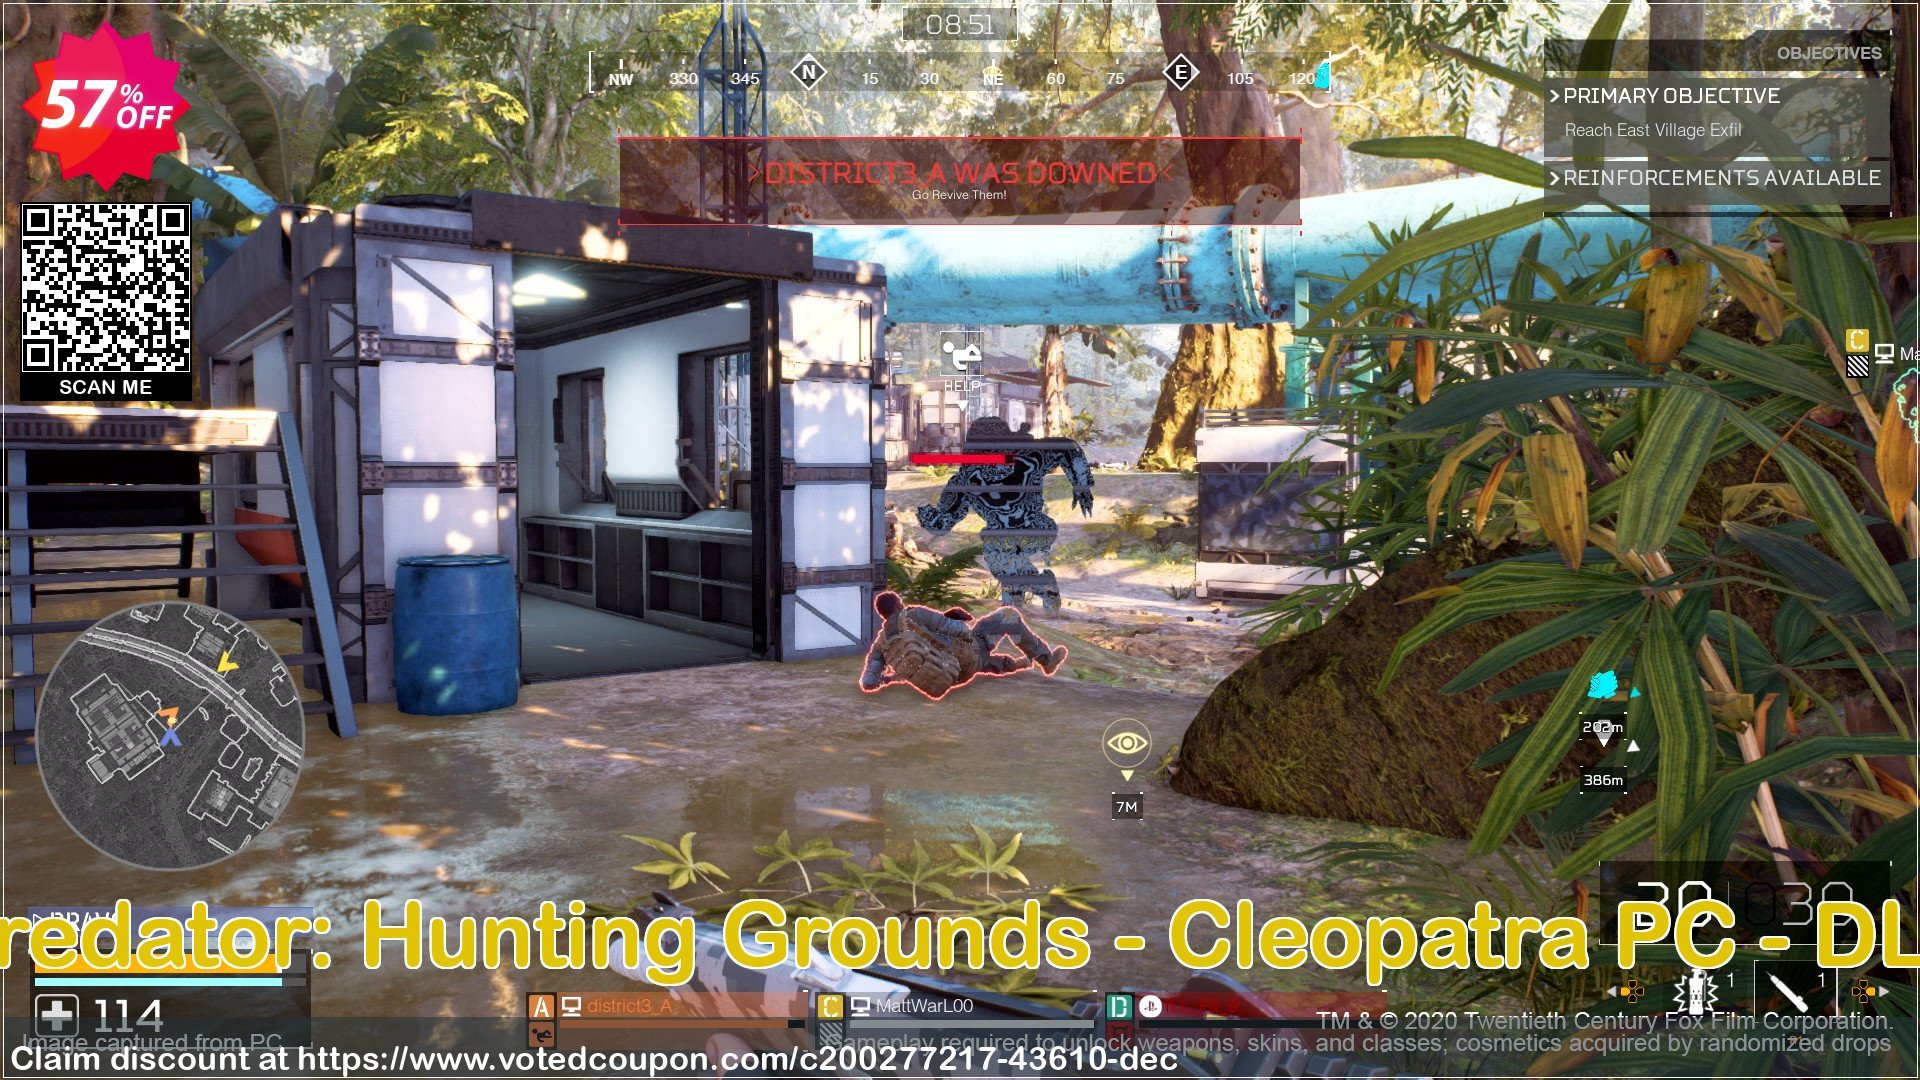 Predator: Hunting Grounds - Cleopatra PC - DLC Coupon Code May 2024, 57% OFF - VotedCoupon